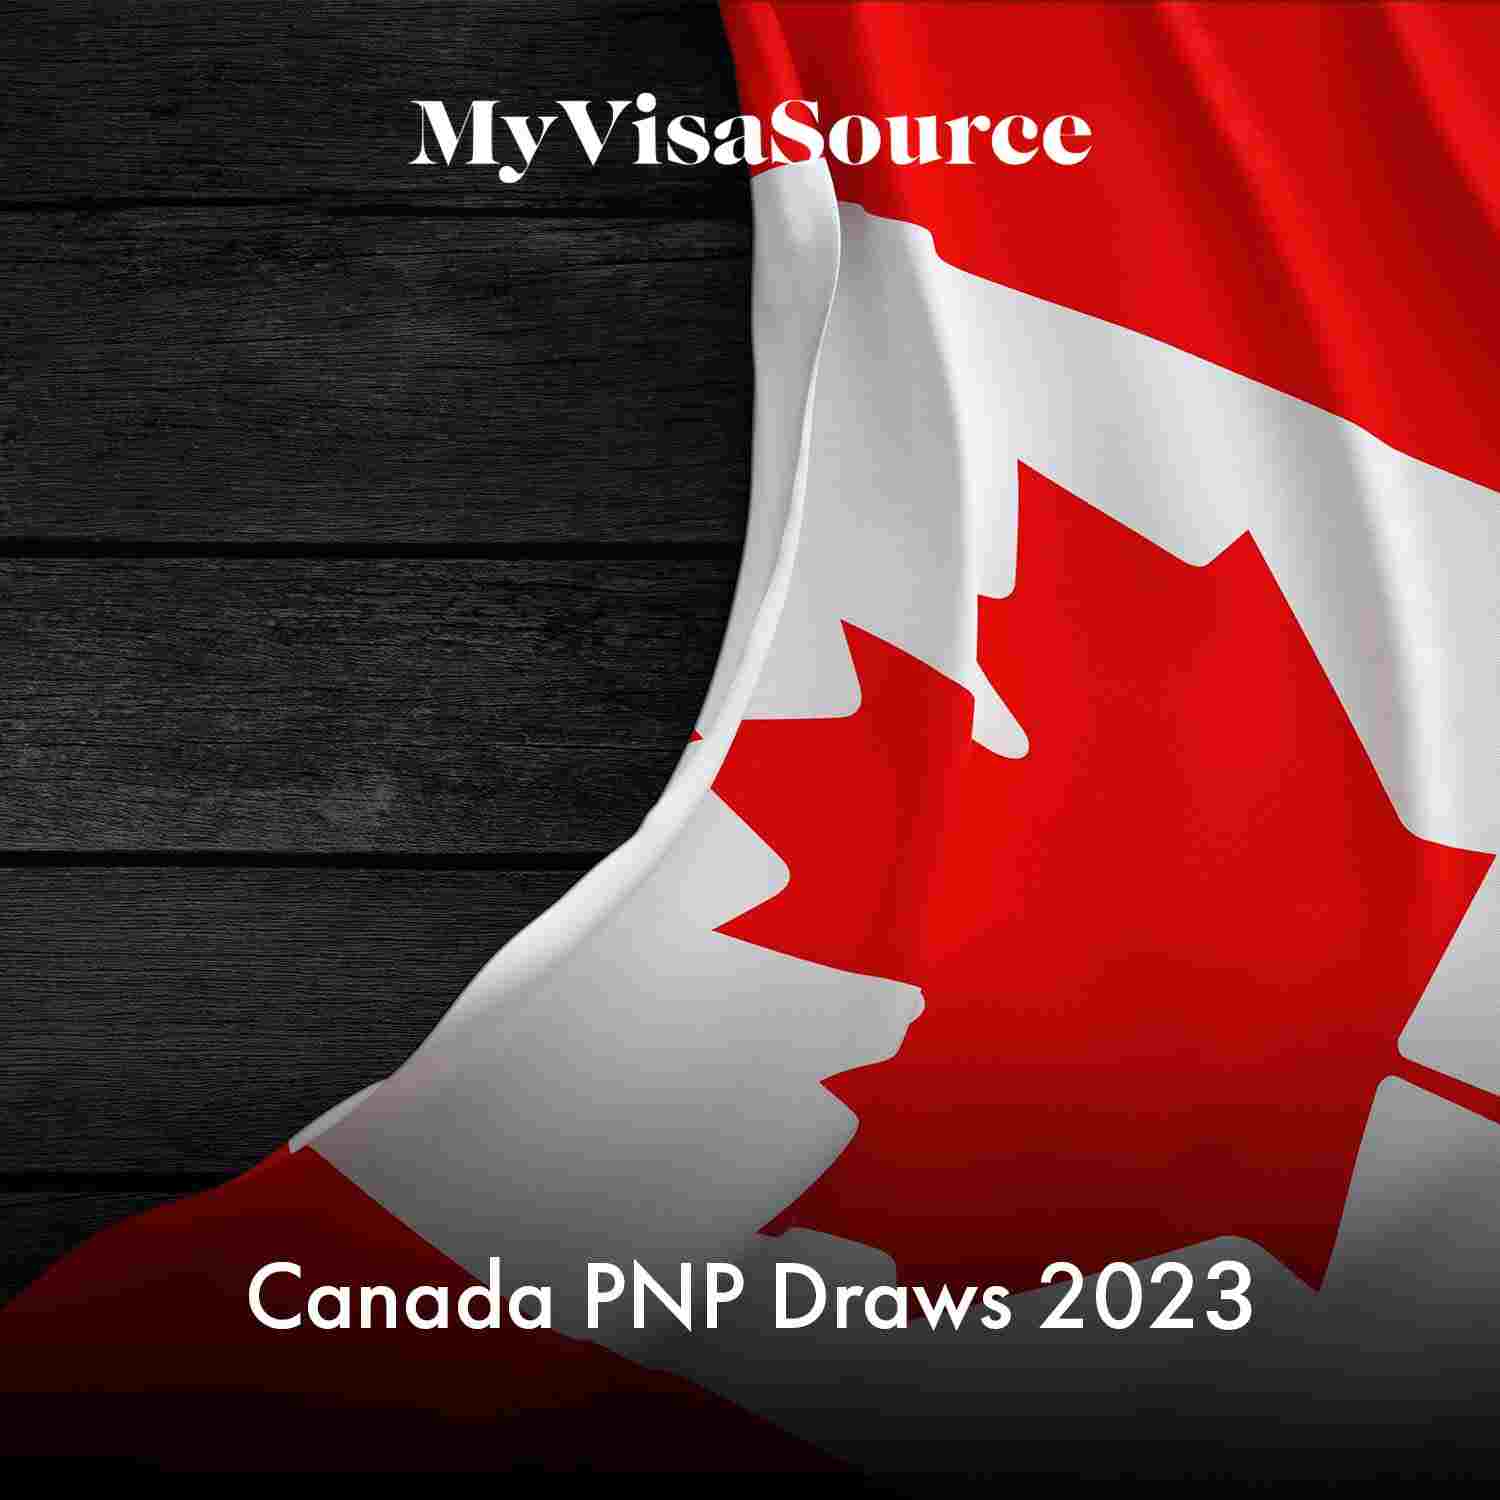 Canada Express Entry - Massive change is expected in 2023